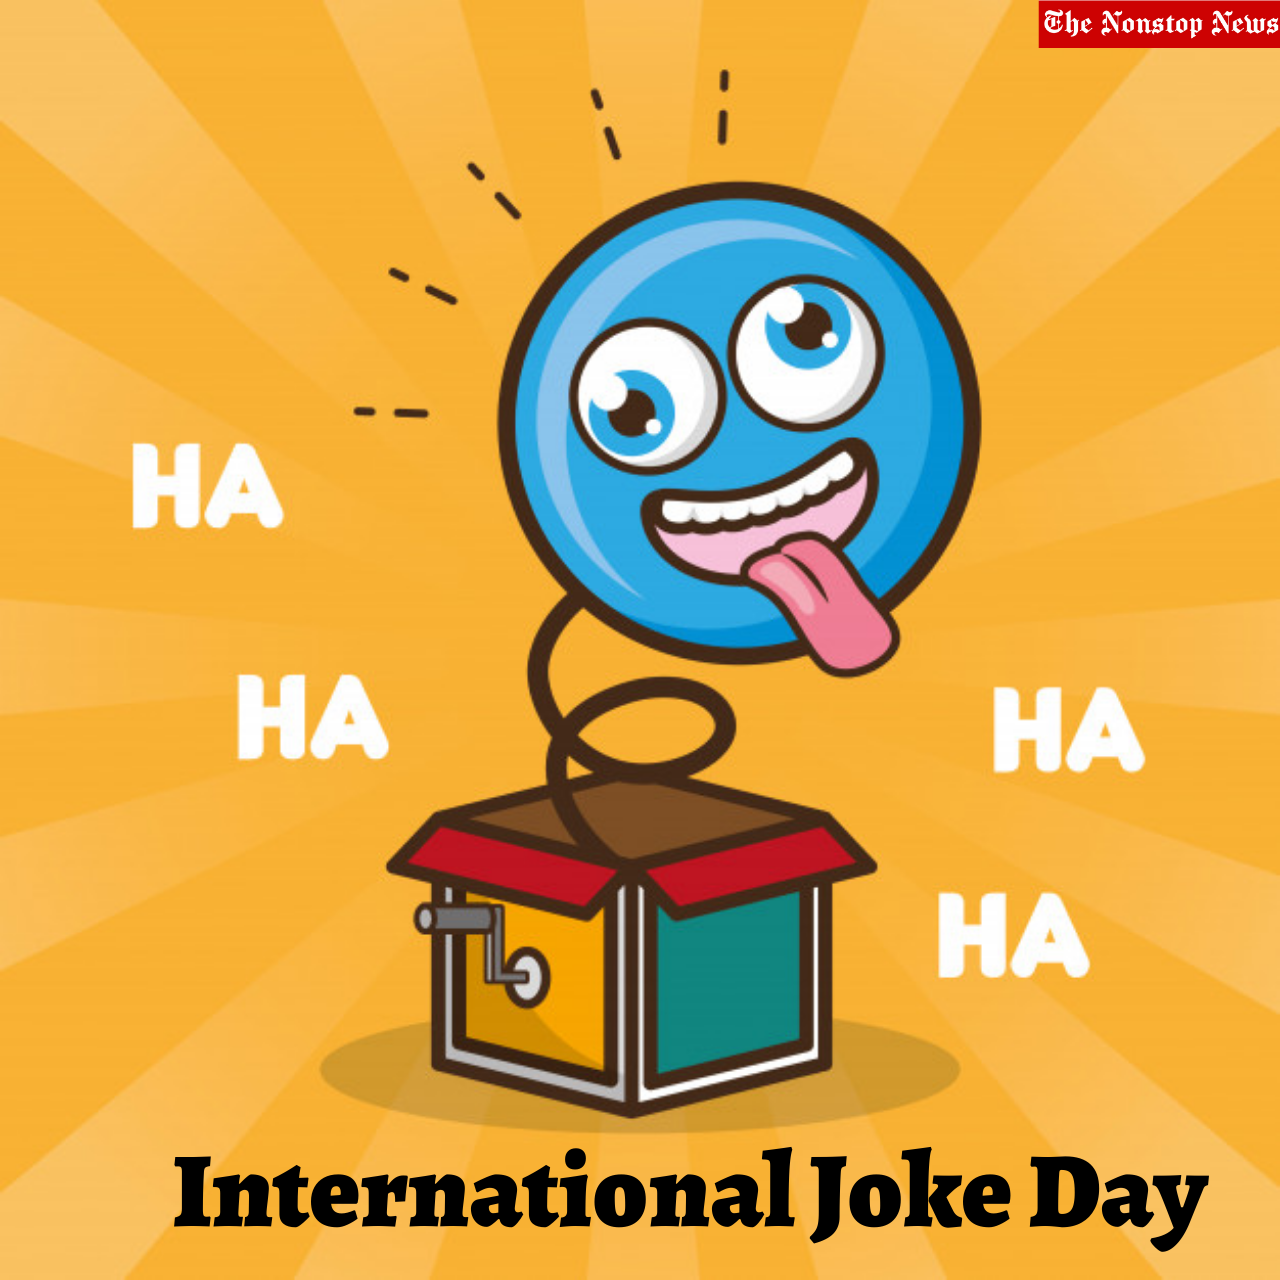 International Joke Day 2021: Quotes, Wishes, Meme, Clipart, Greetings, and Images to celebrate this Day